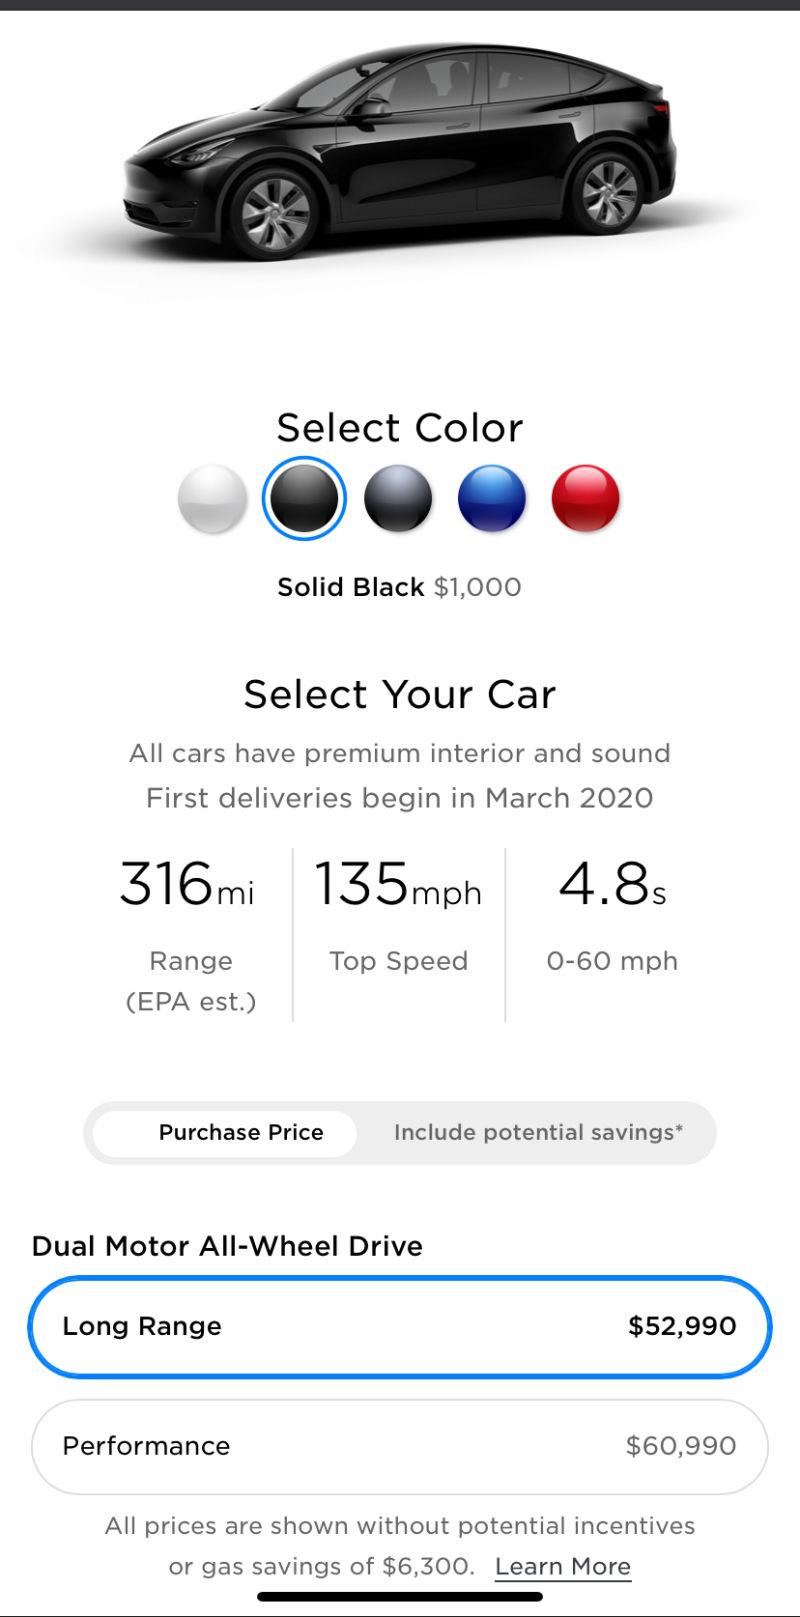 Illustration for article titled I Was actually interested in the Model Y. But that price...